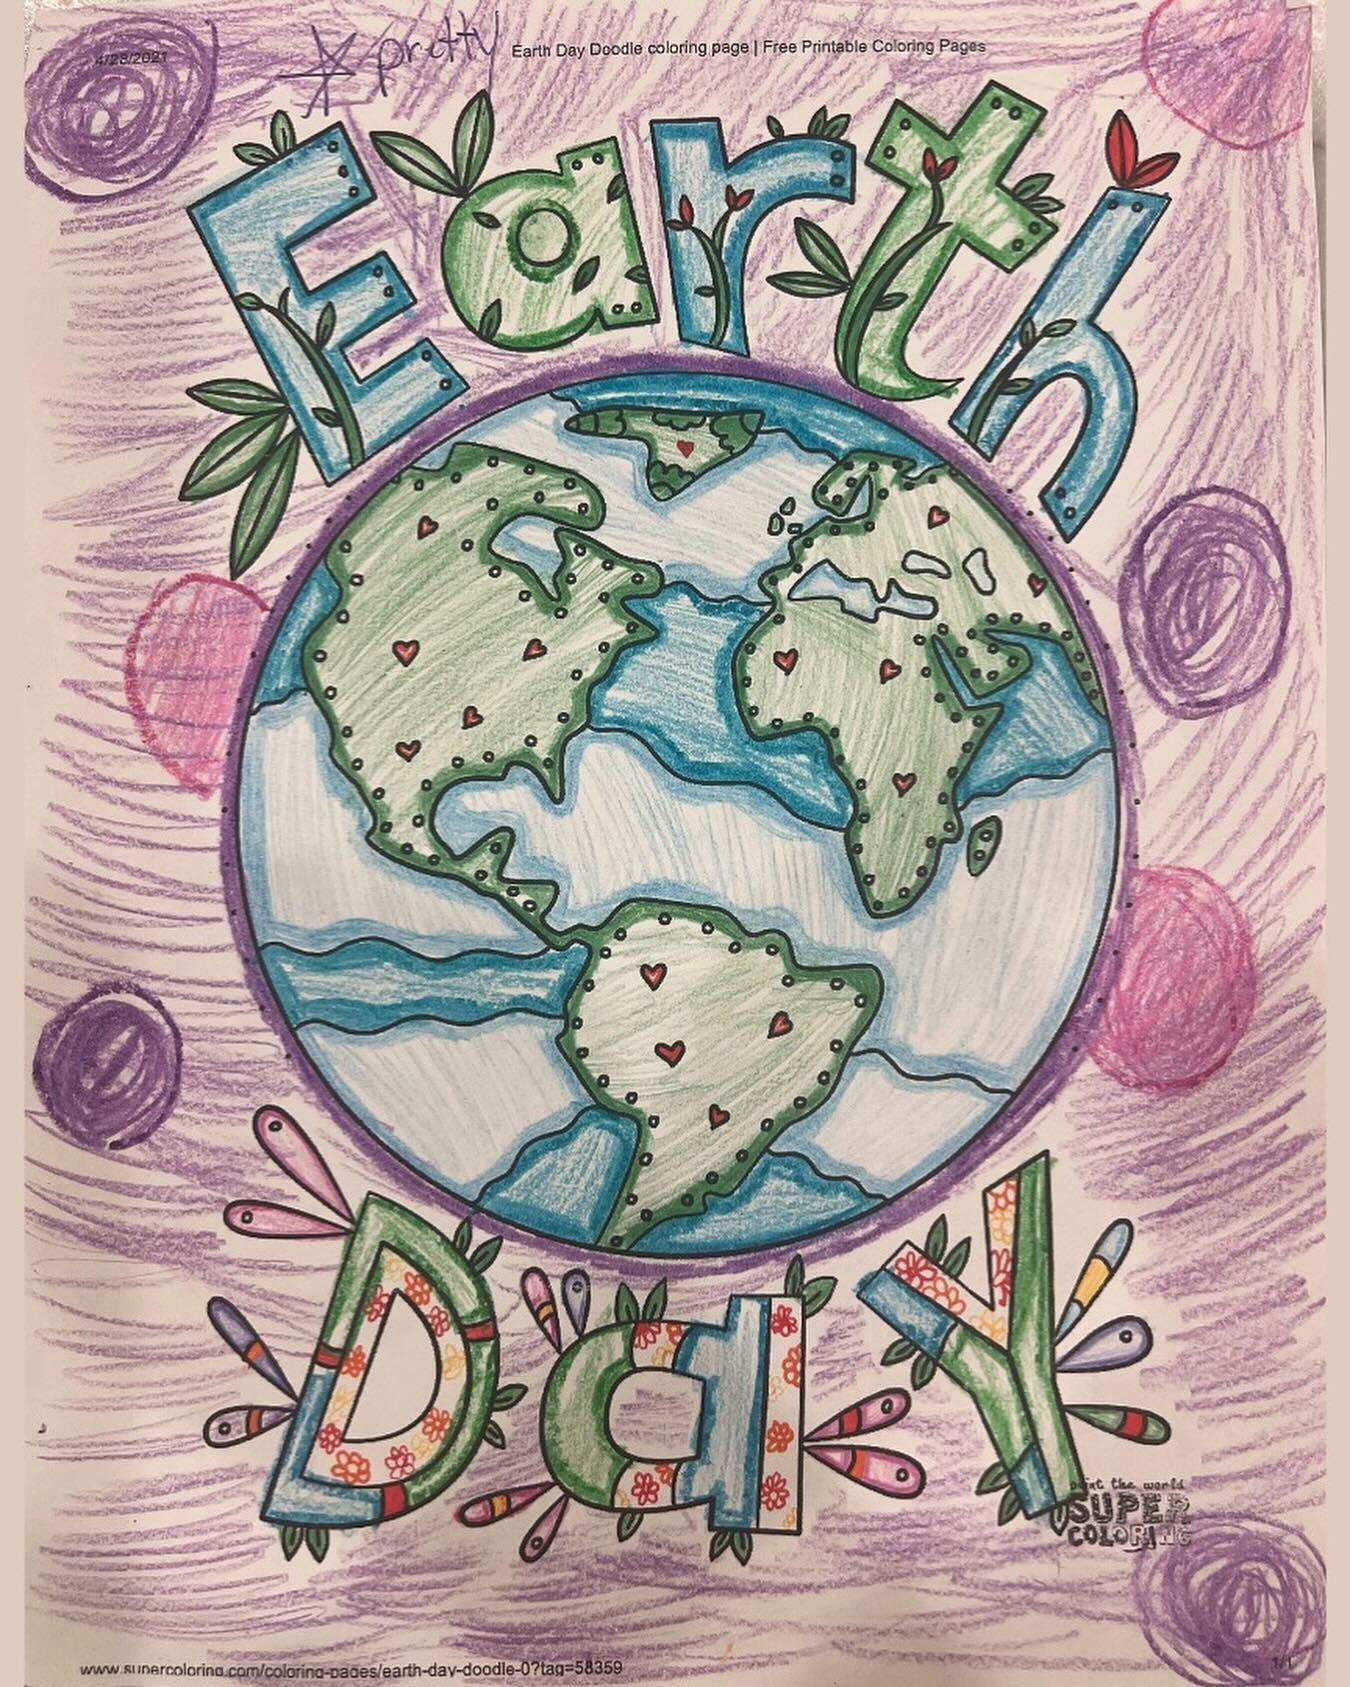 Happy Earth Day! This drawing was done by my nine year old daughter, Reina. We must commit to protecting our beautiful planet Earth to ensure a bright future for the next generation. 🌎

#earthday